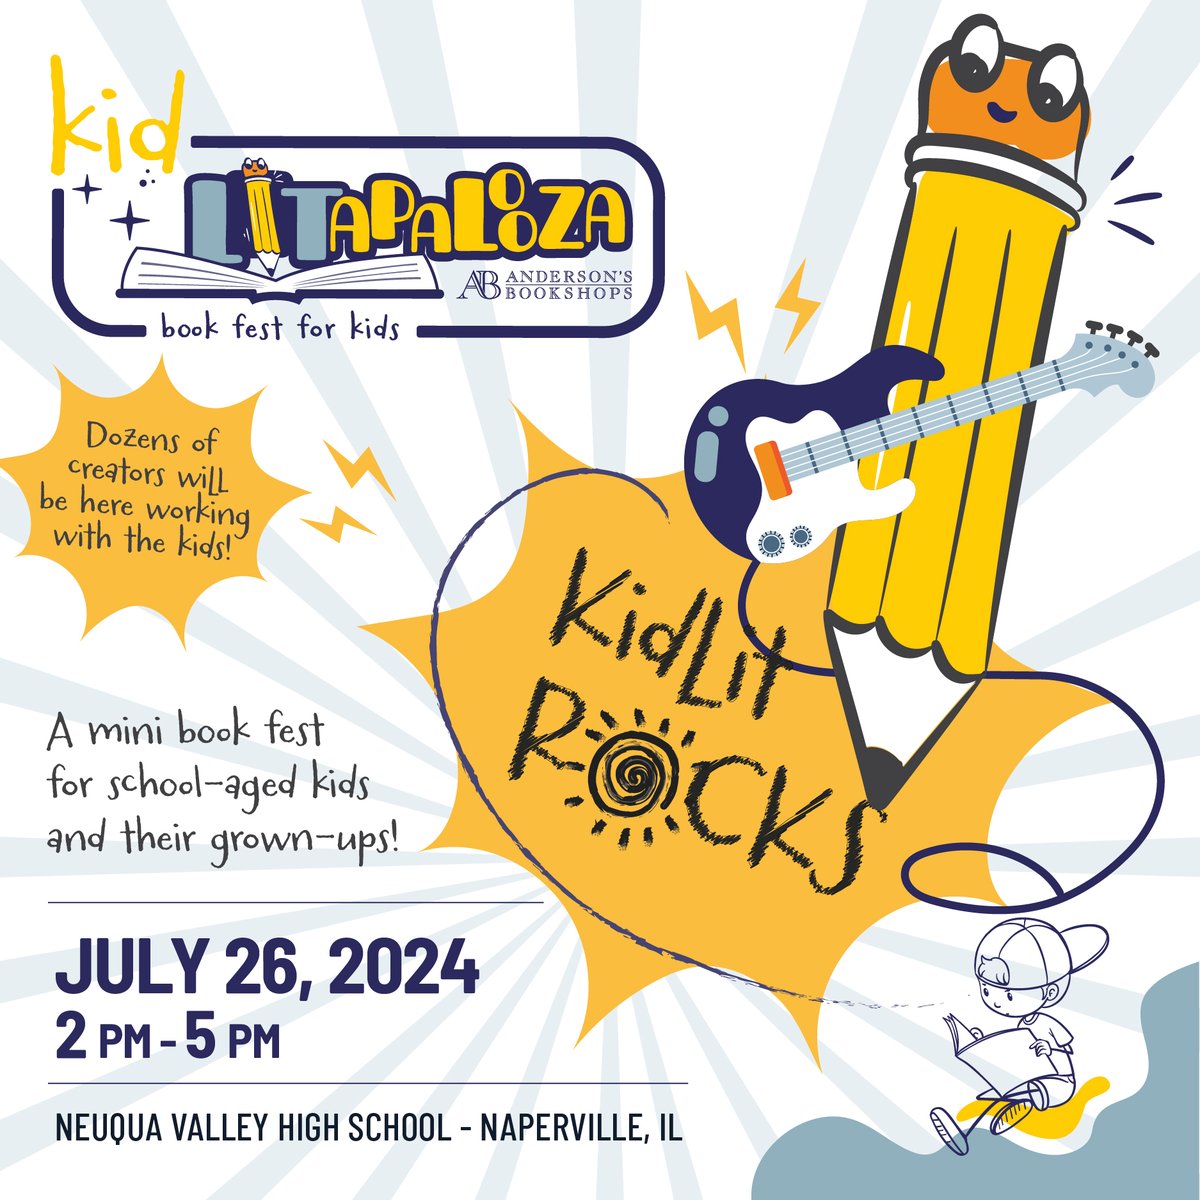 RECENTLY ANNOUNCED: kidLITapalooza is a BRAND NEW mini-bookfest for kids in grades 1-8 this summer! Just $10 to see a keynote speech by Loren Long @lorenlong attend workshops with 50+ authors and illustrators, shop, and attend a signing session! REGISTER: KidLITapalooza2024.eventcombo.com